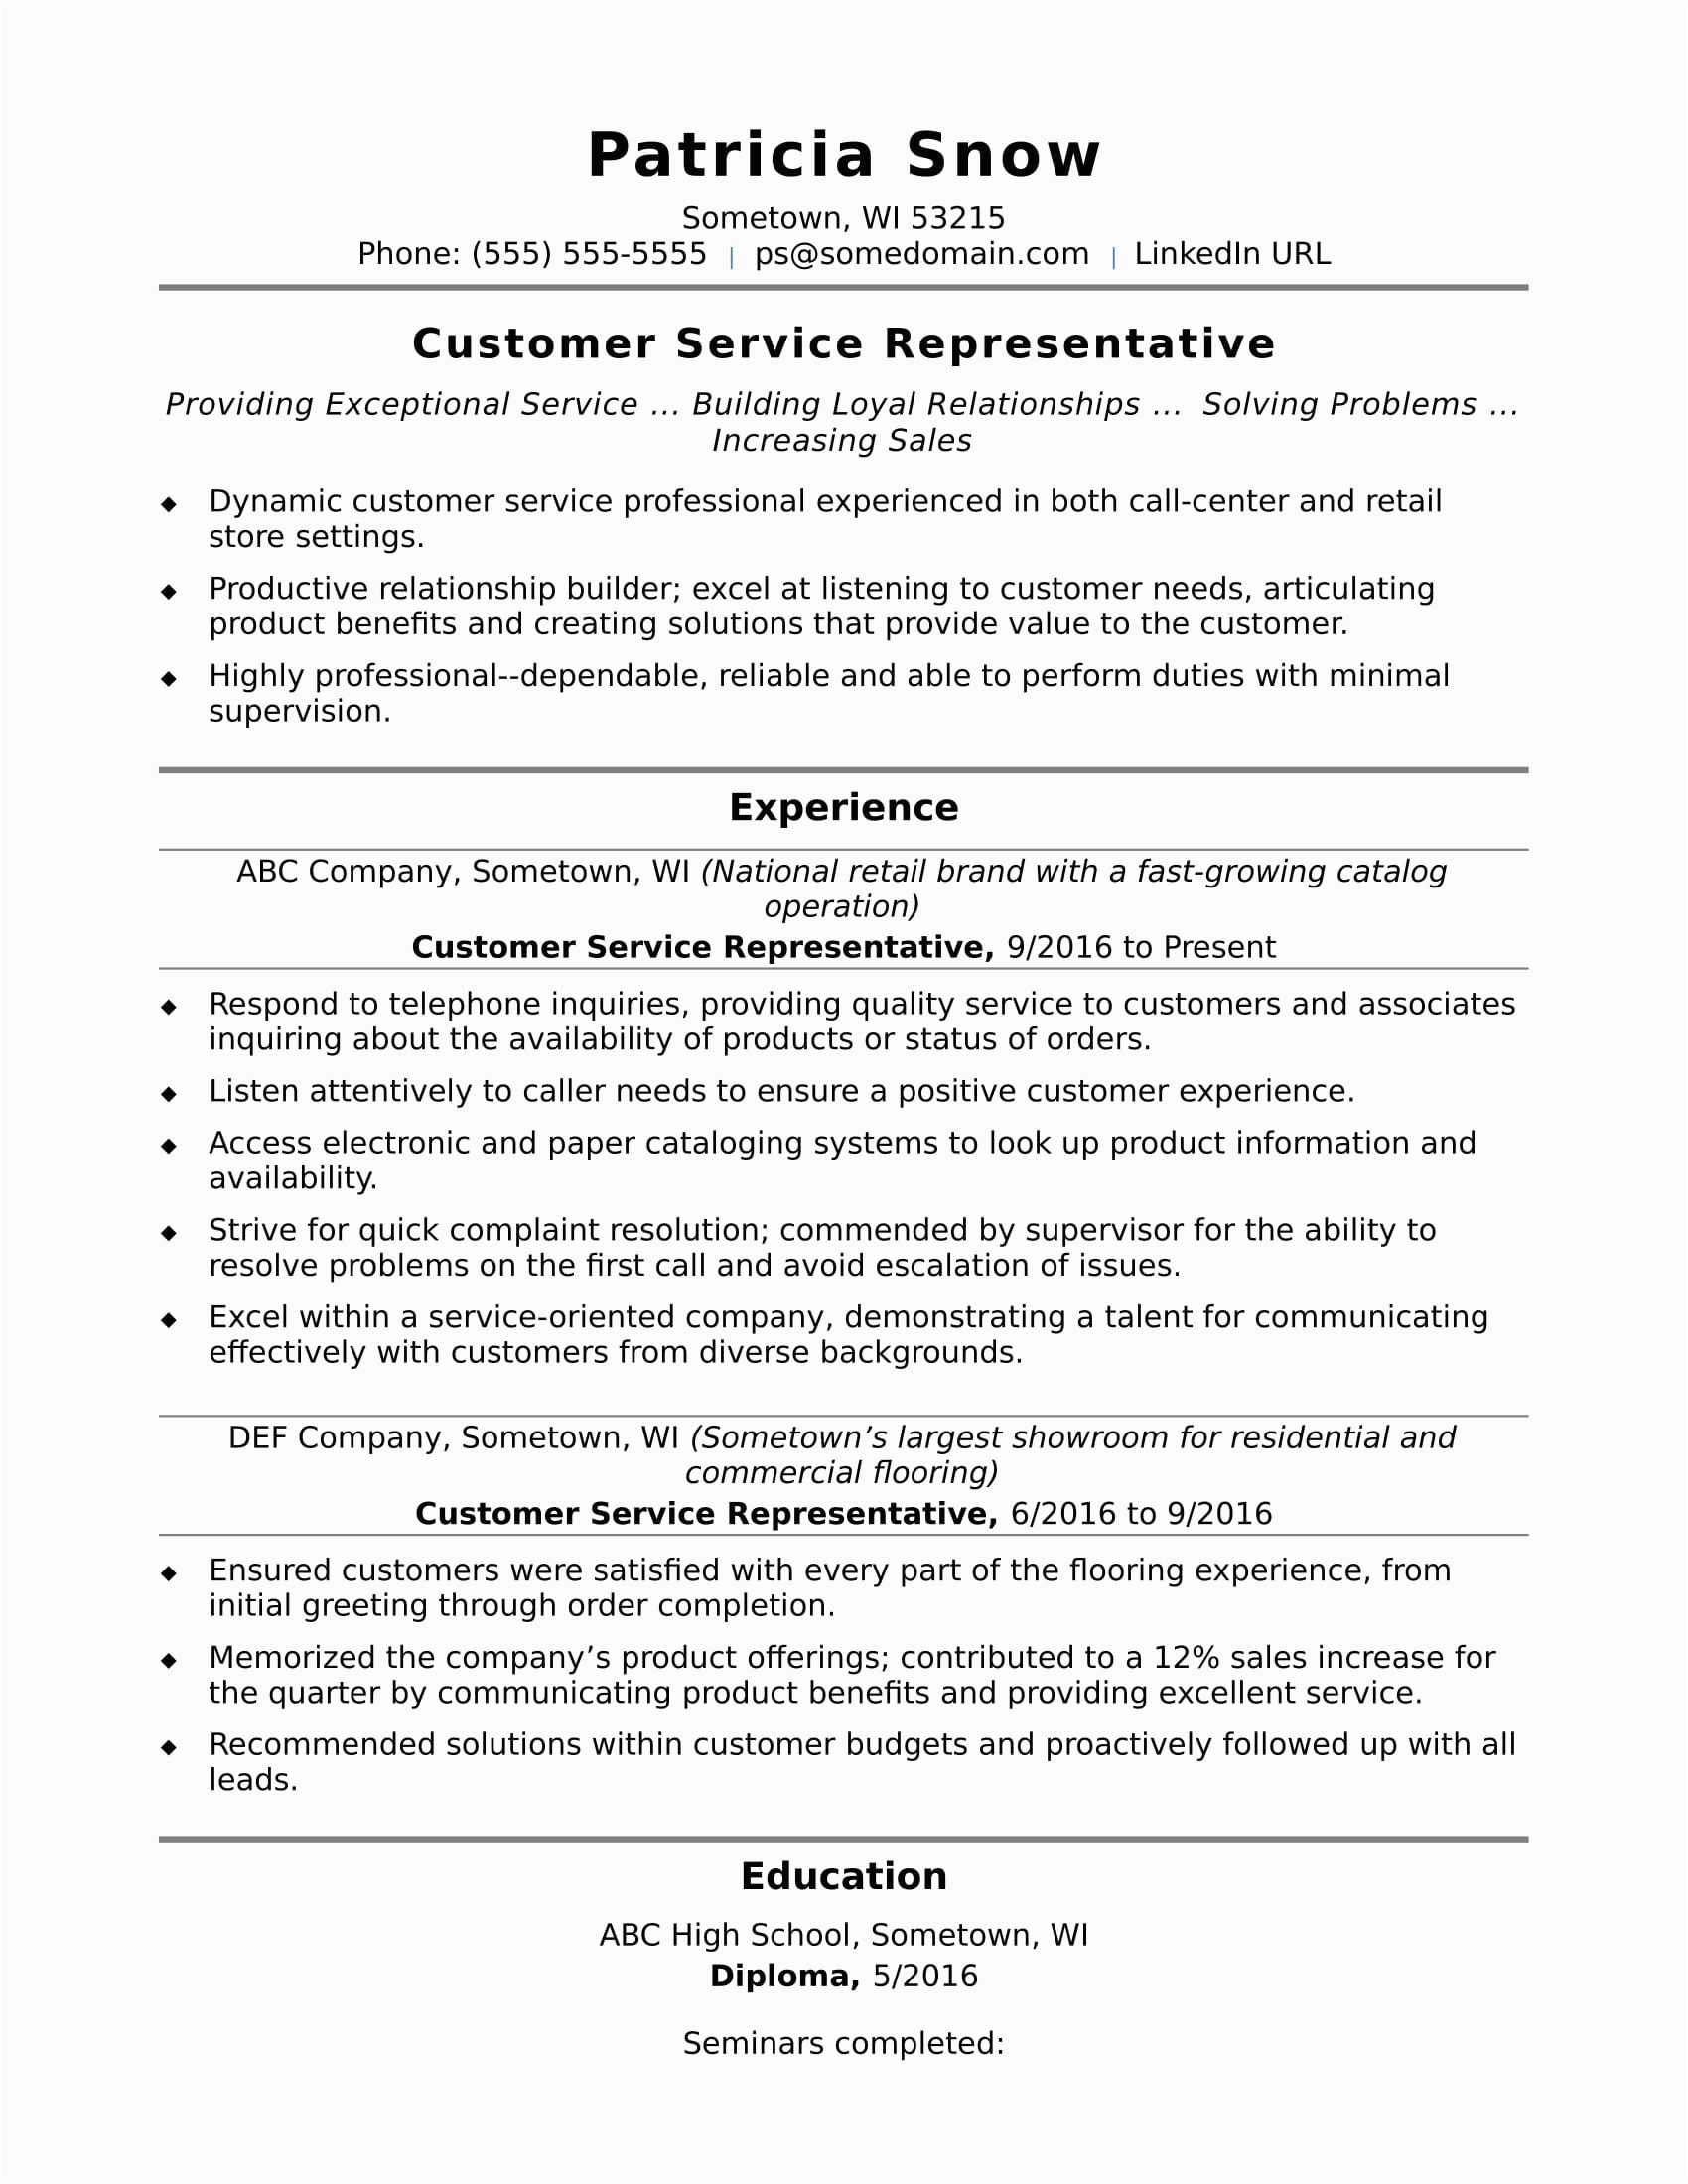 Resume Sample for A Costumer Service Rep Customer Service Representative Resume Sample